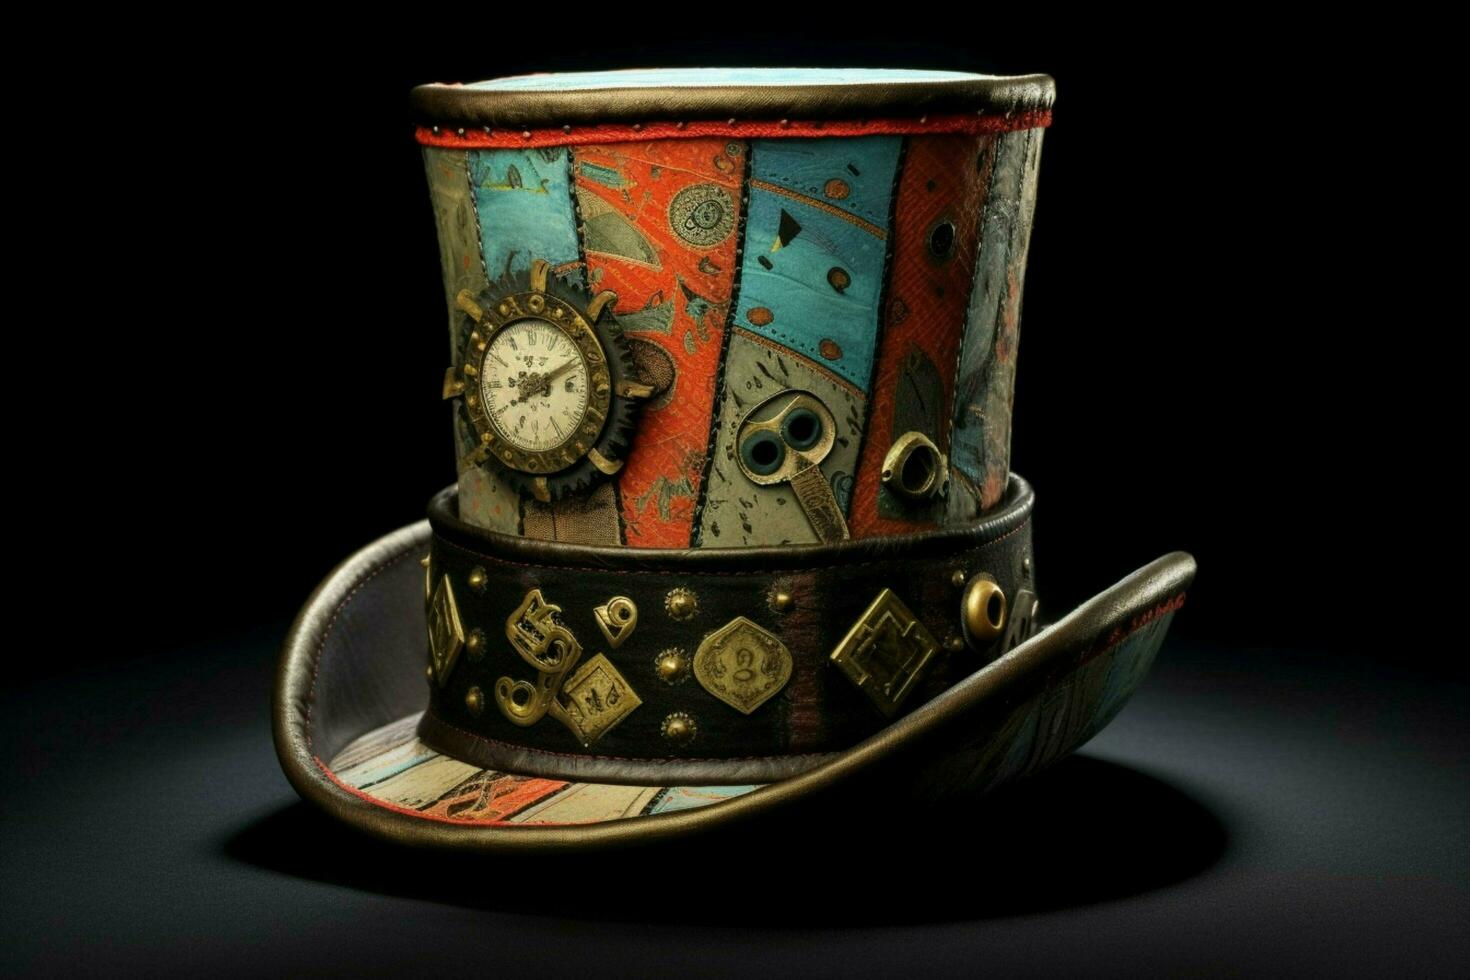 A top hat with a quirky design photo